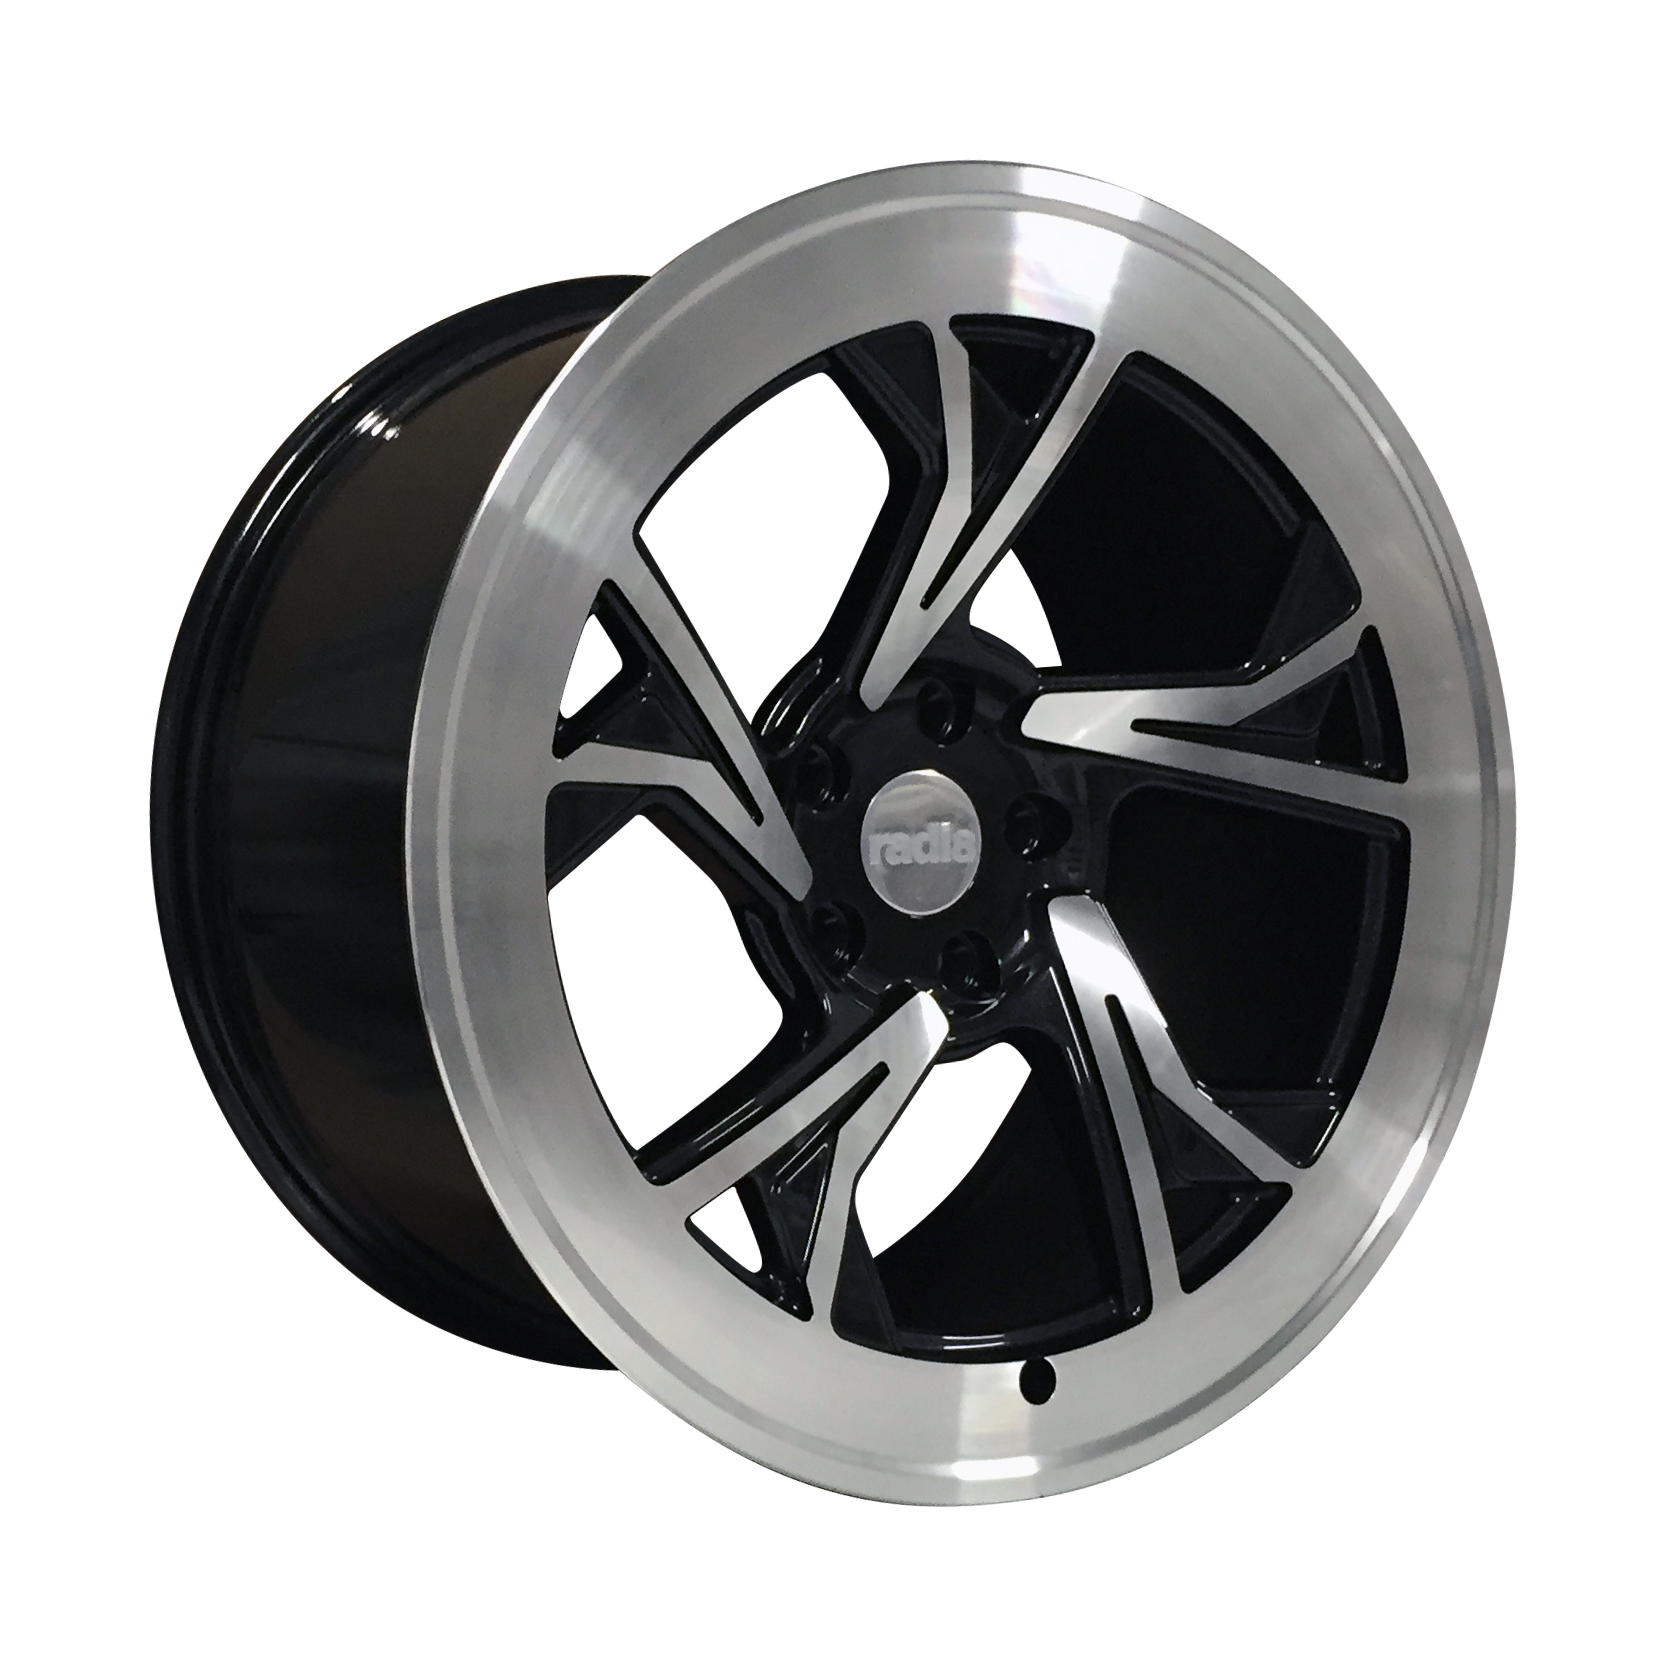 NEW 19" RADI8 R8C5 ALLOY WHEELS IN GLOSS BLACK WITH POLISHED FACE, WIDER 10" REARS